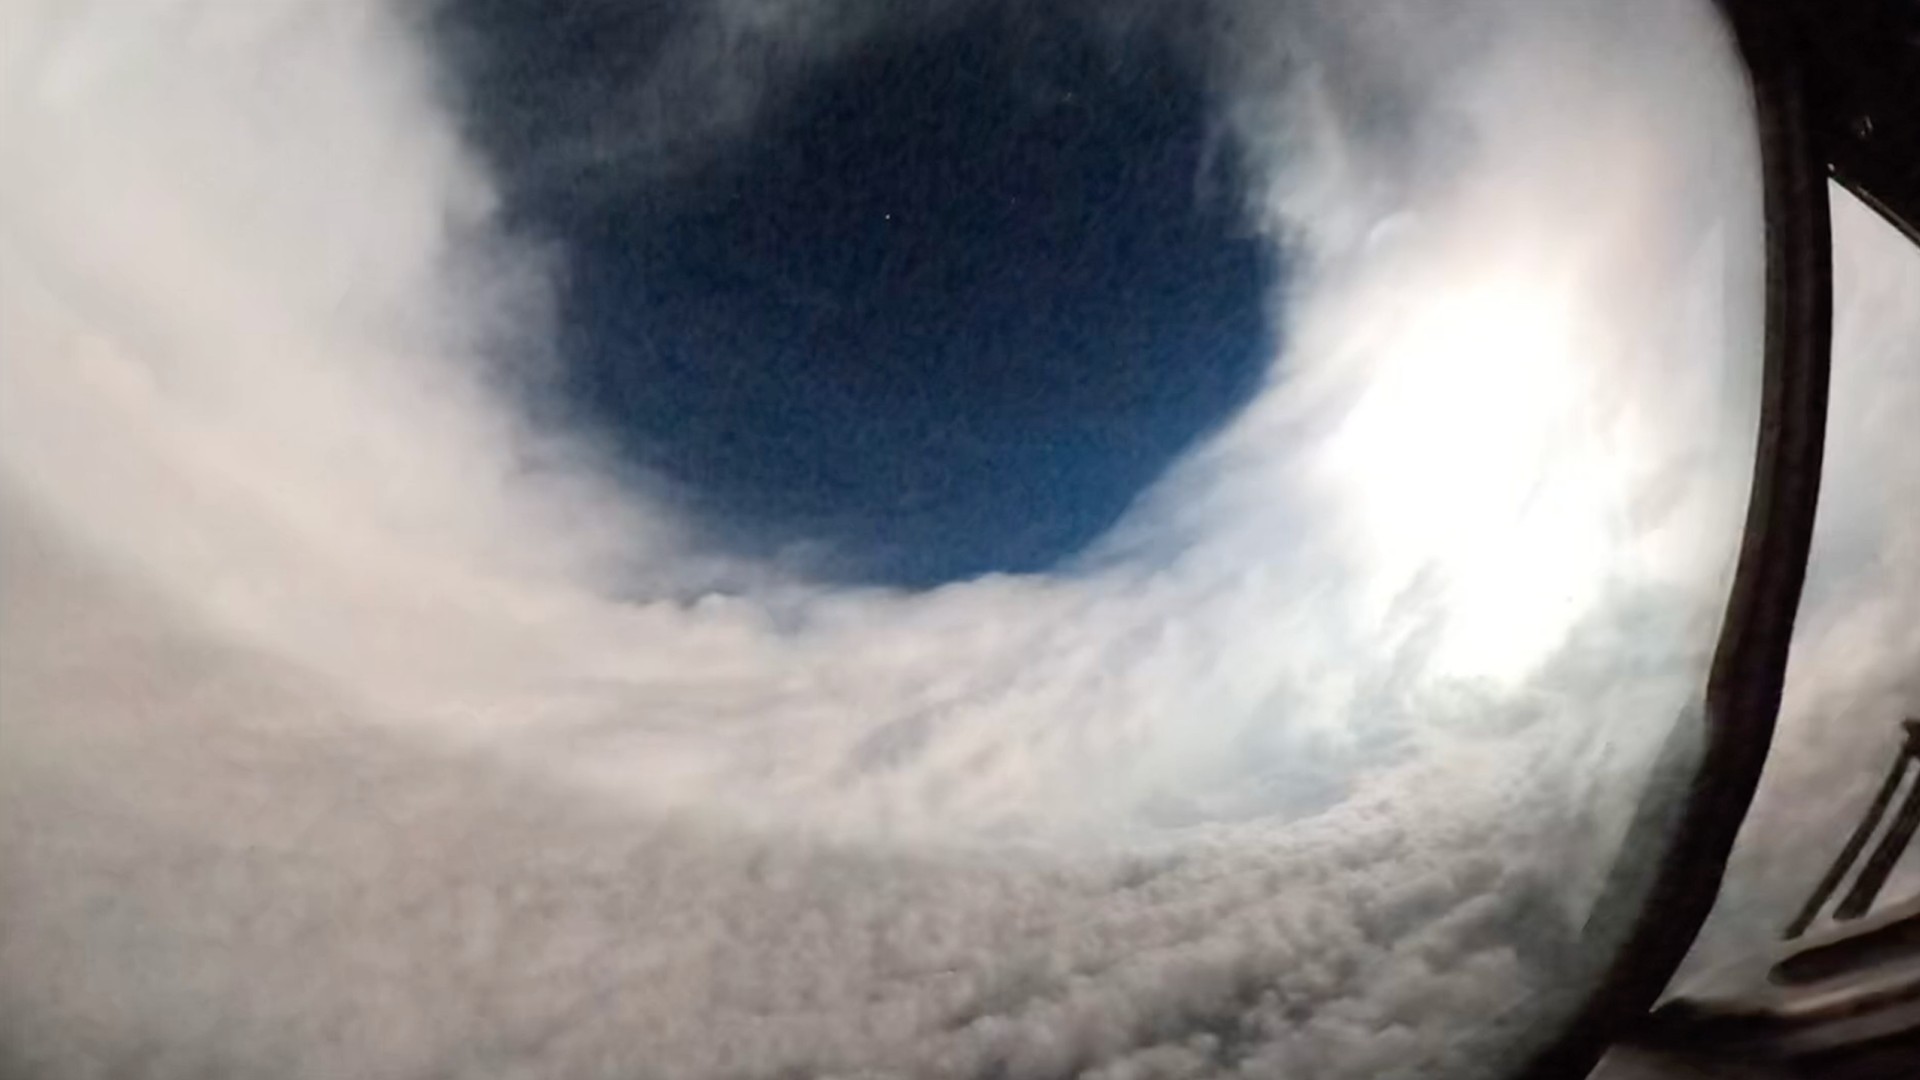 Hurricane Lee looks absolutely terrifying in this footage from inside its eye (video)